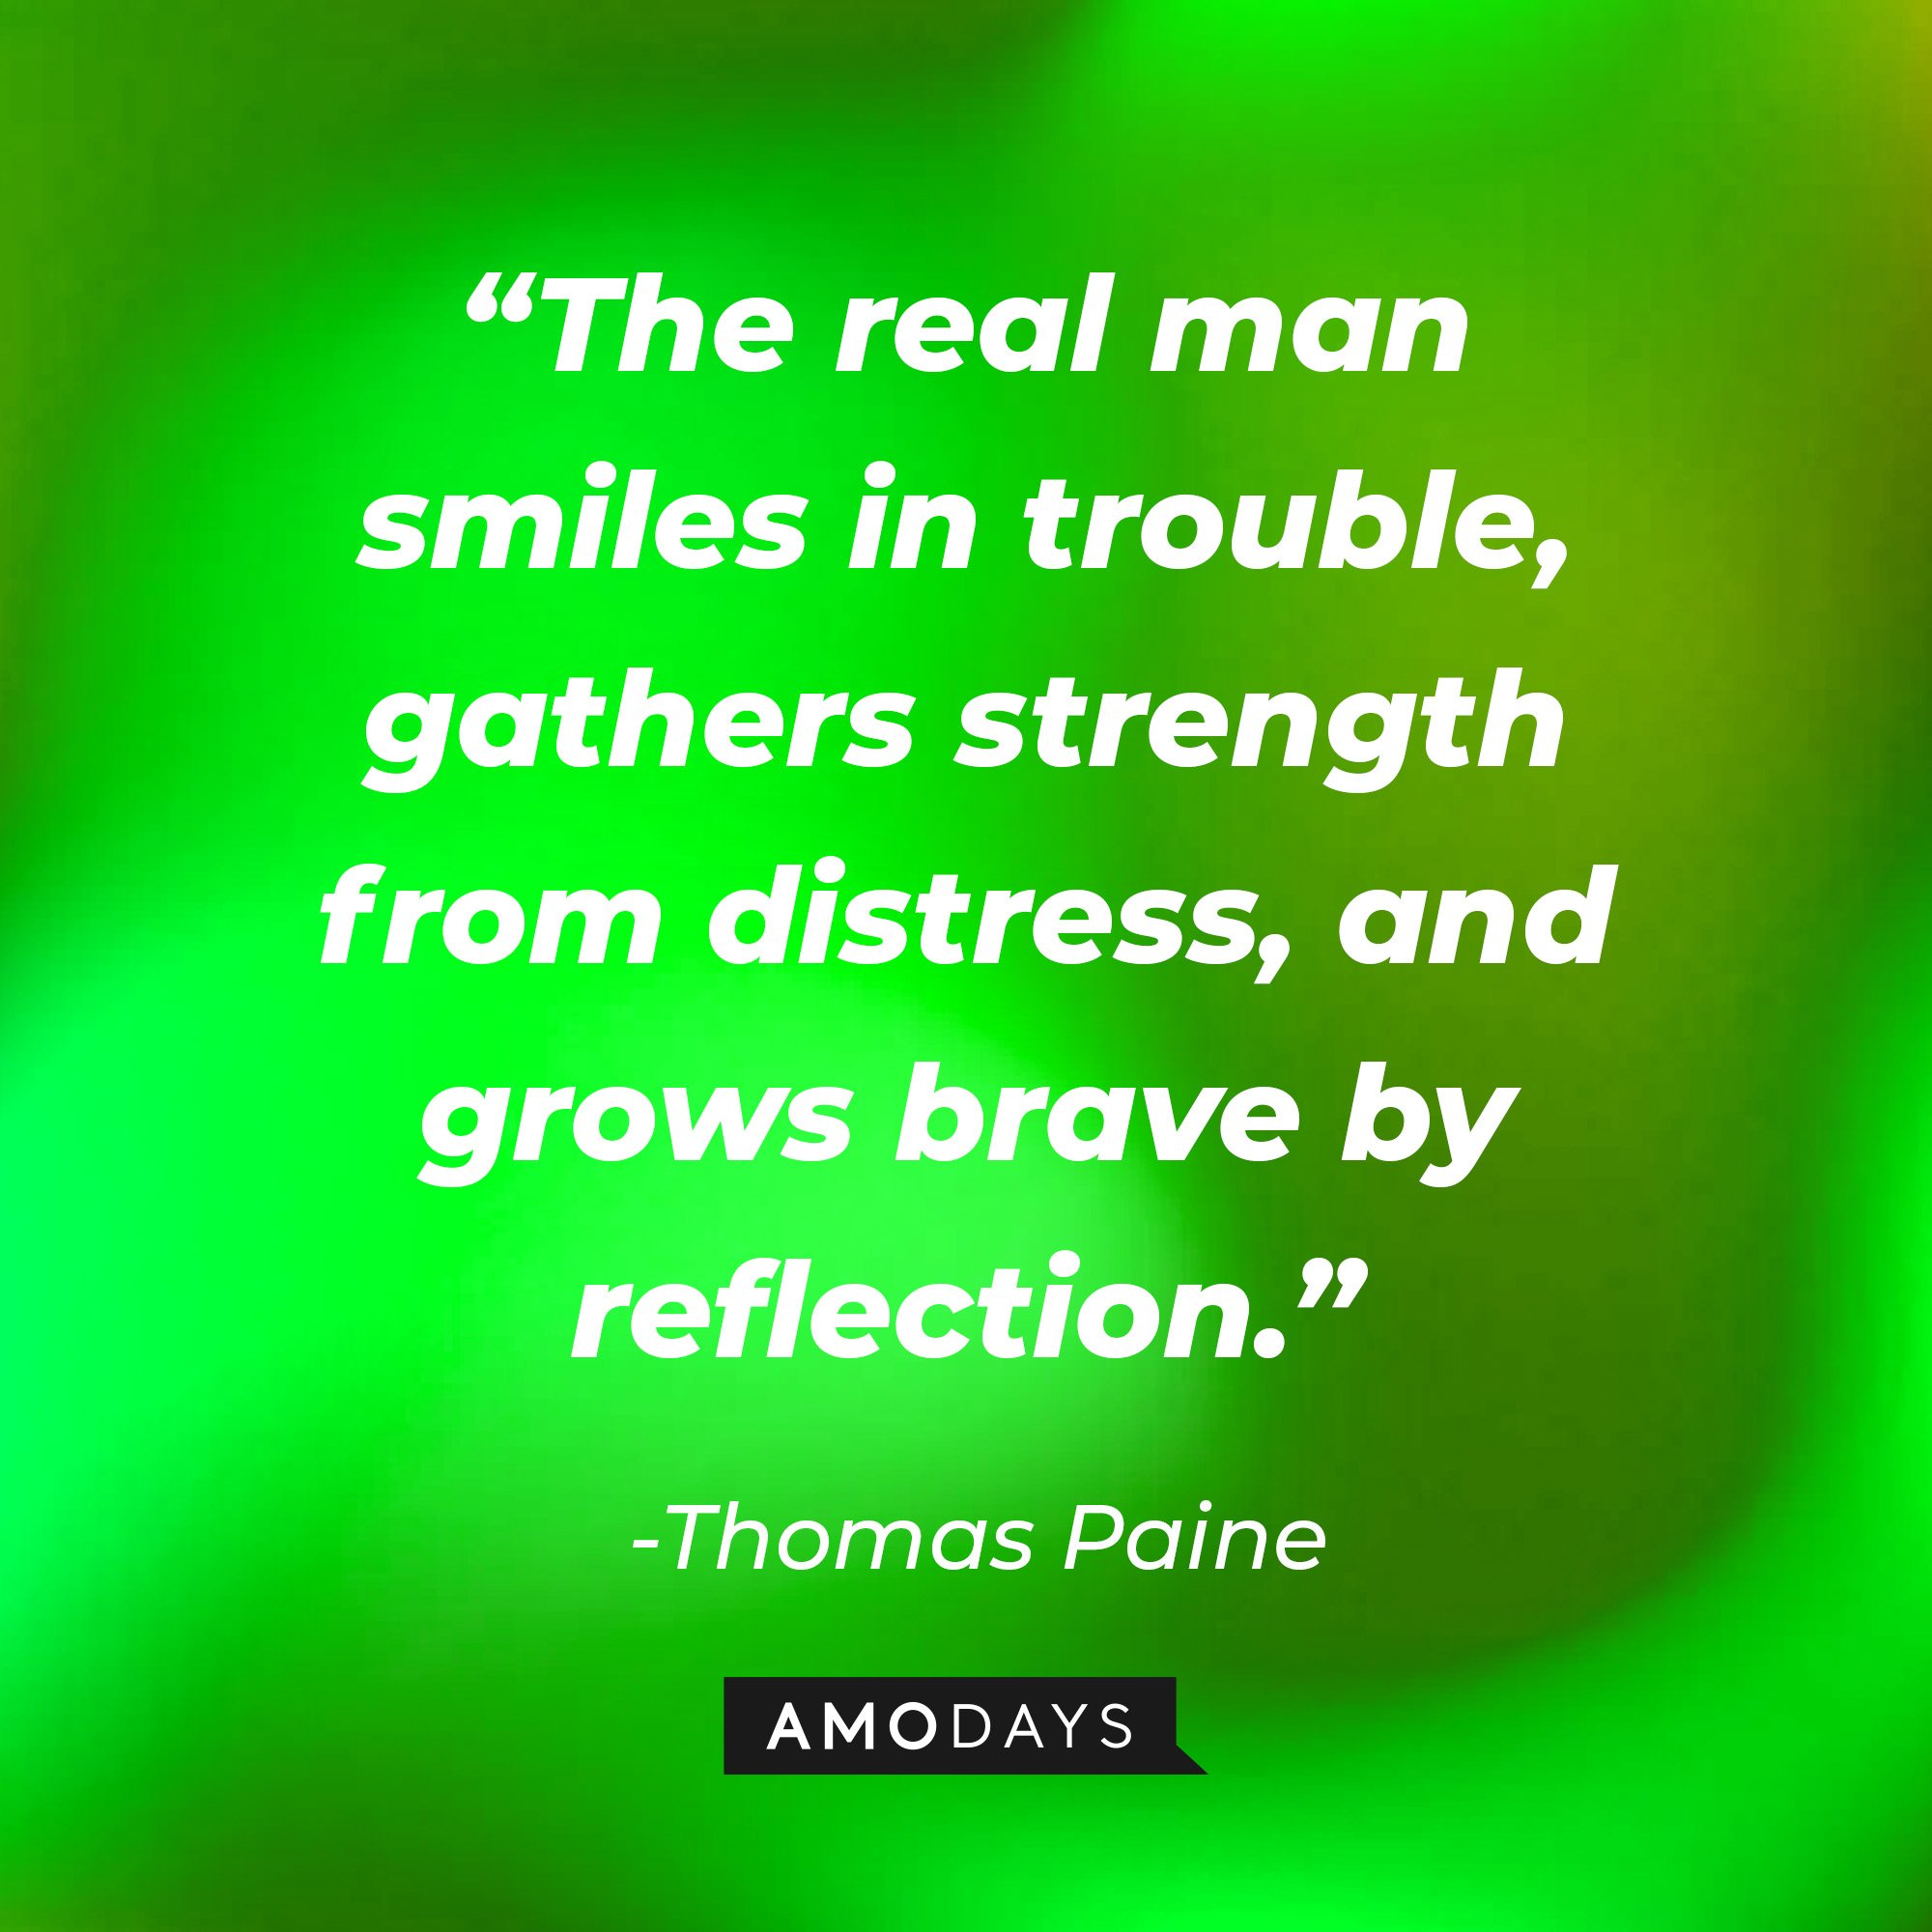 Thomas Paine's quote: “The real man smiles in trouble, gathers strength from distress, and grows brave by reflection.” | Image: AmoDays